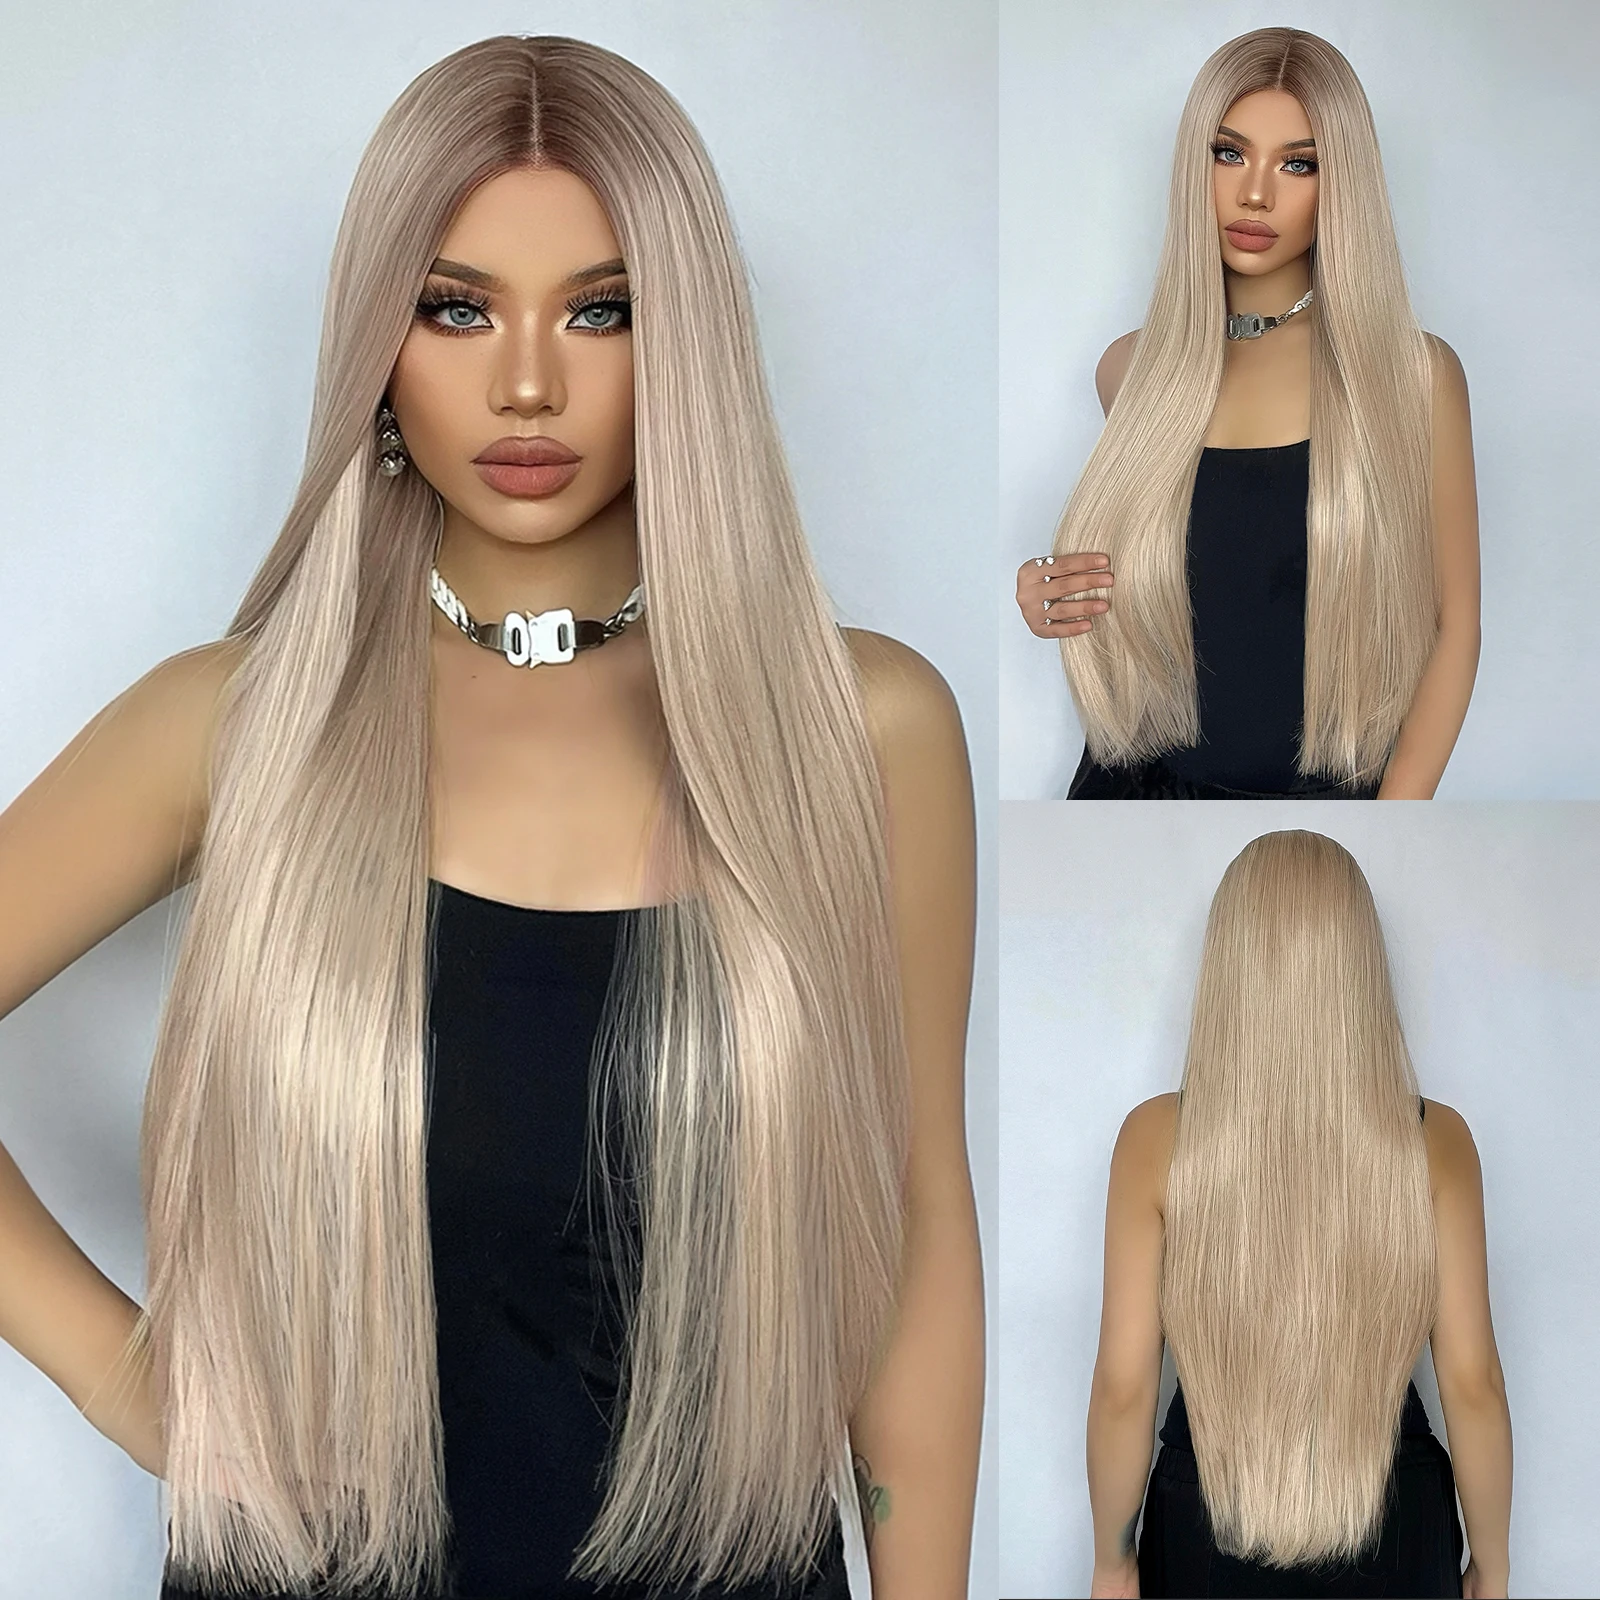 

HAIRCUBE 28 Inches Lace Front Synthetic Wigs for Black Women Long Straight Blonde Hair Middle Part Daily Cosplay High Temperture